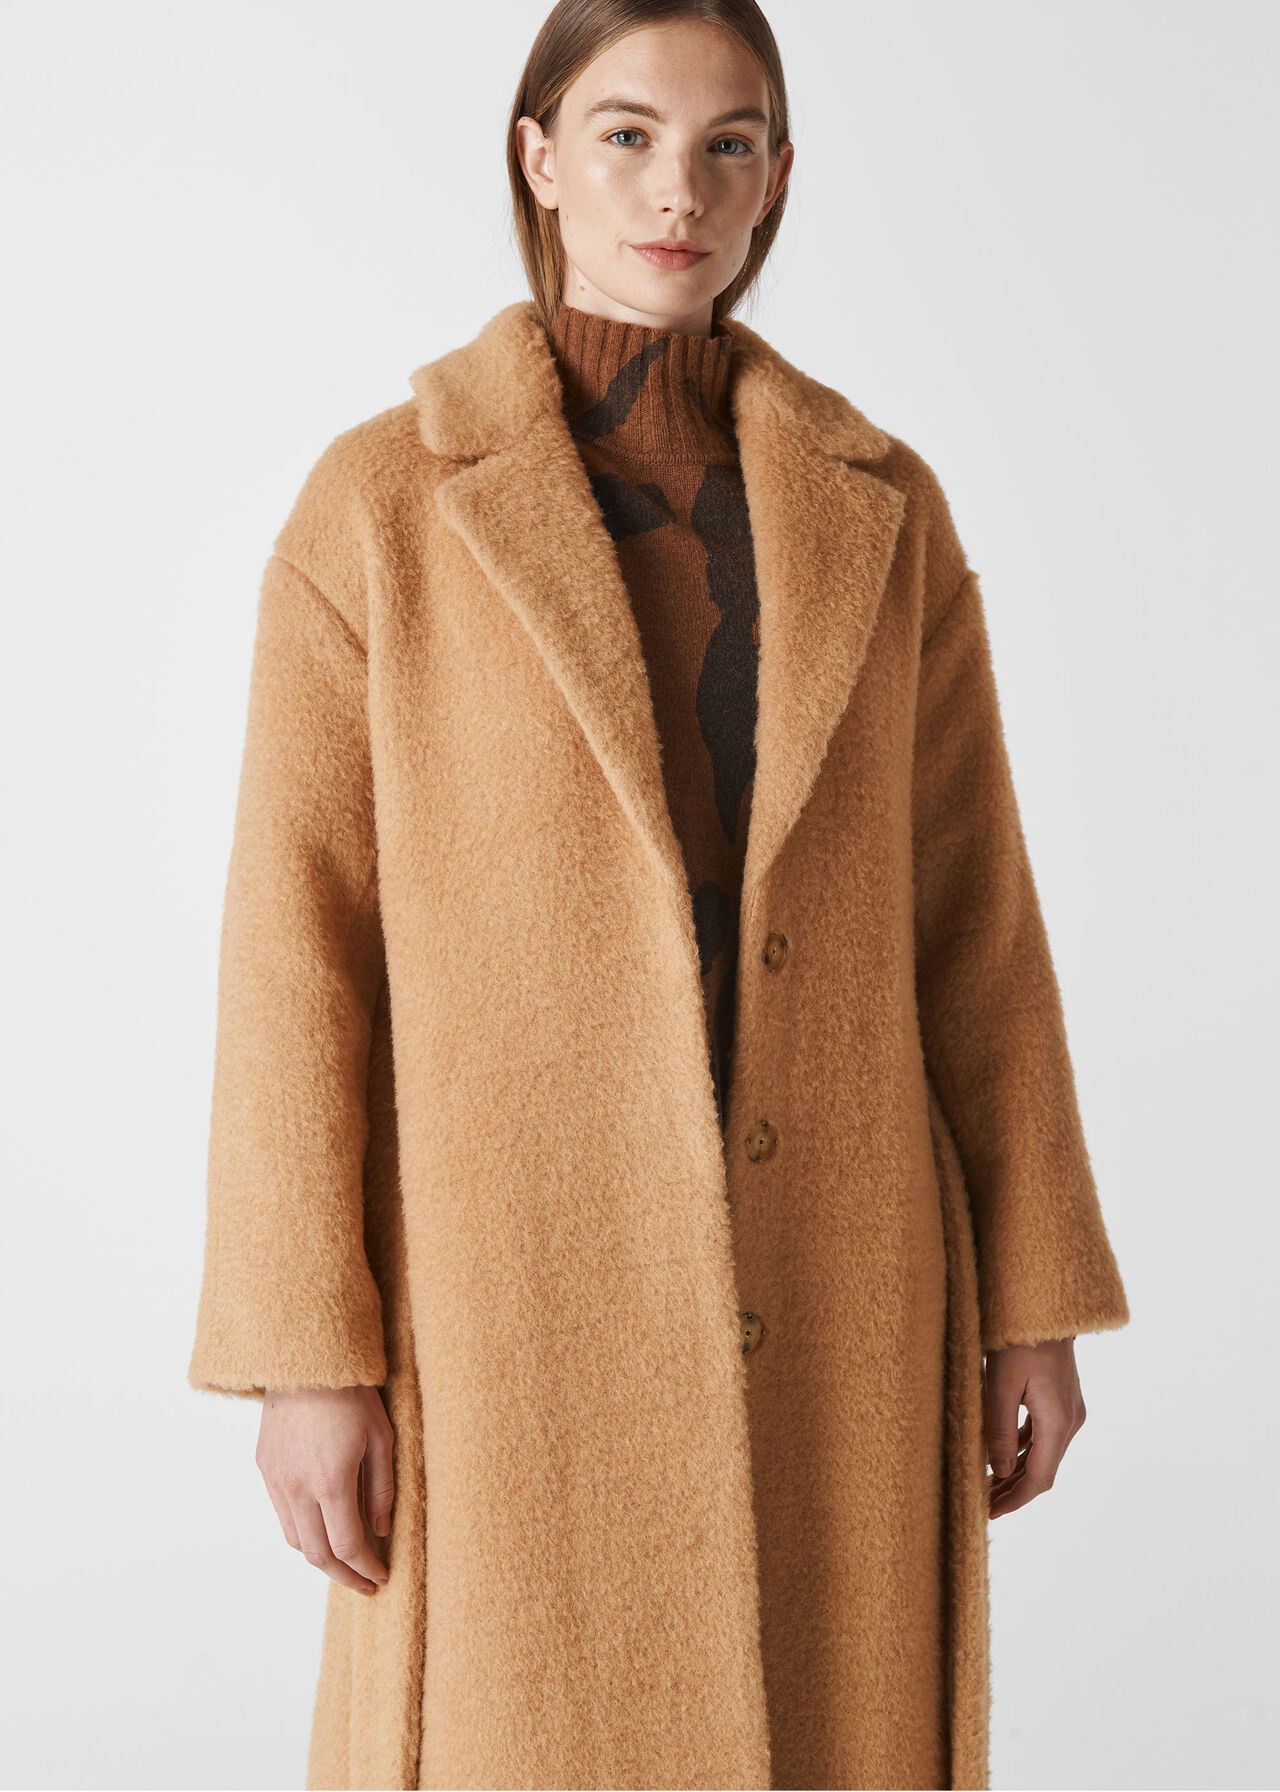 Camel Wool Textured Belted Coat | WHISTLES